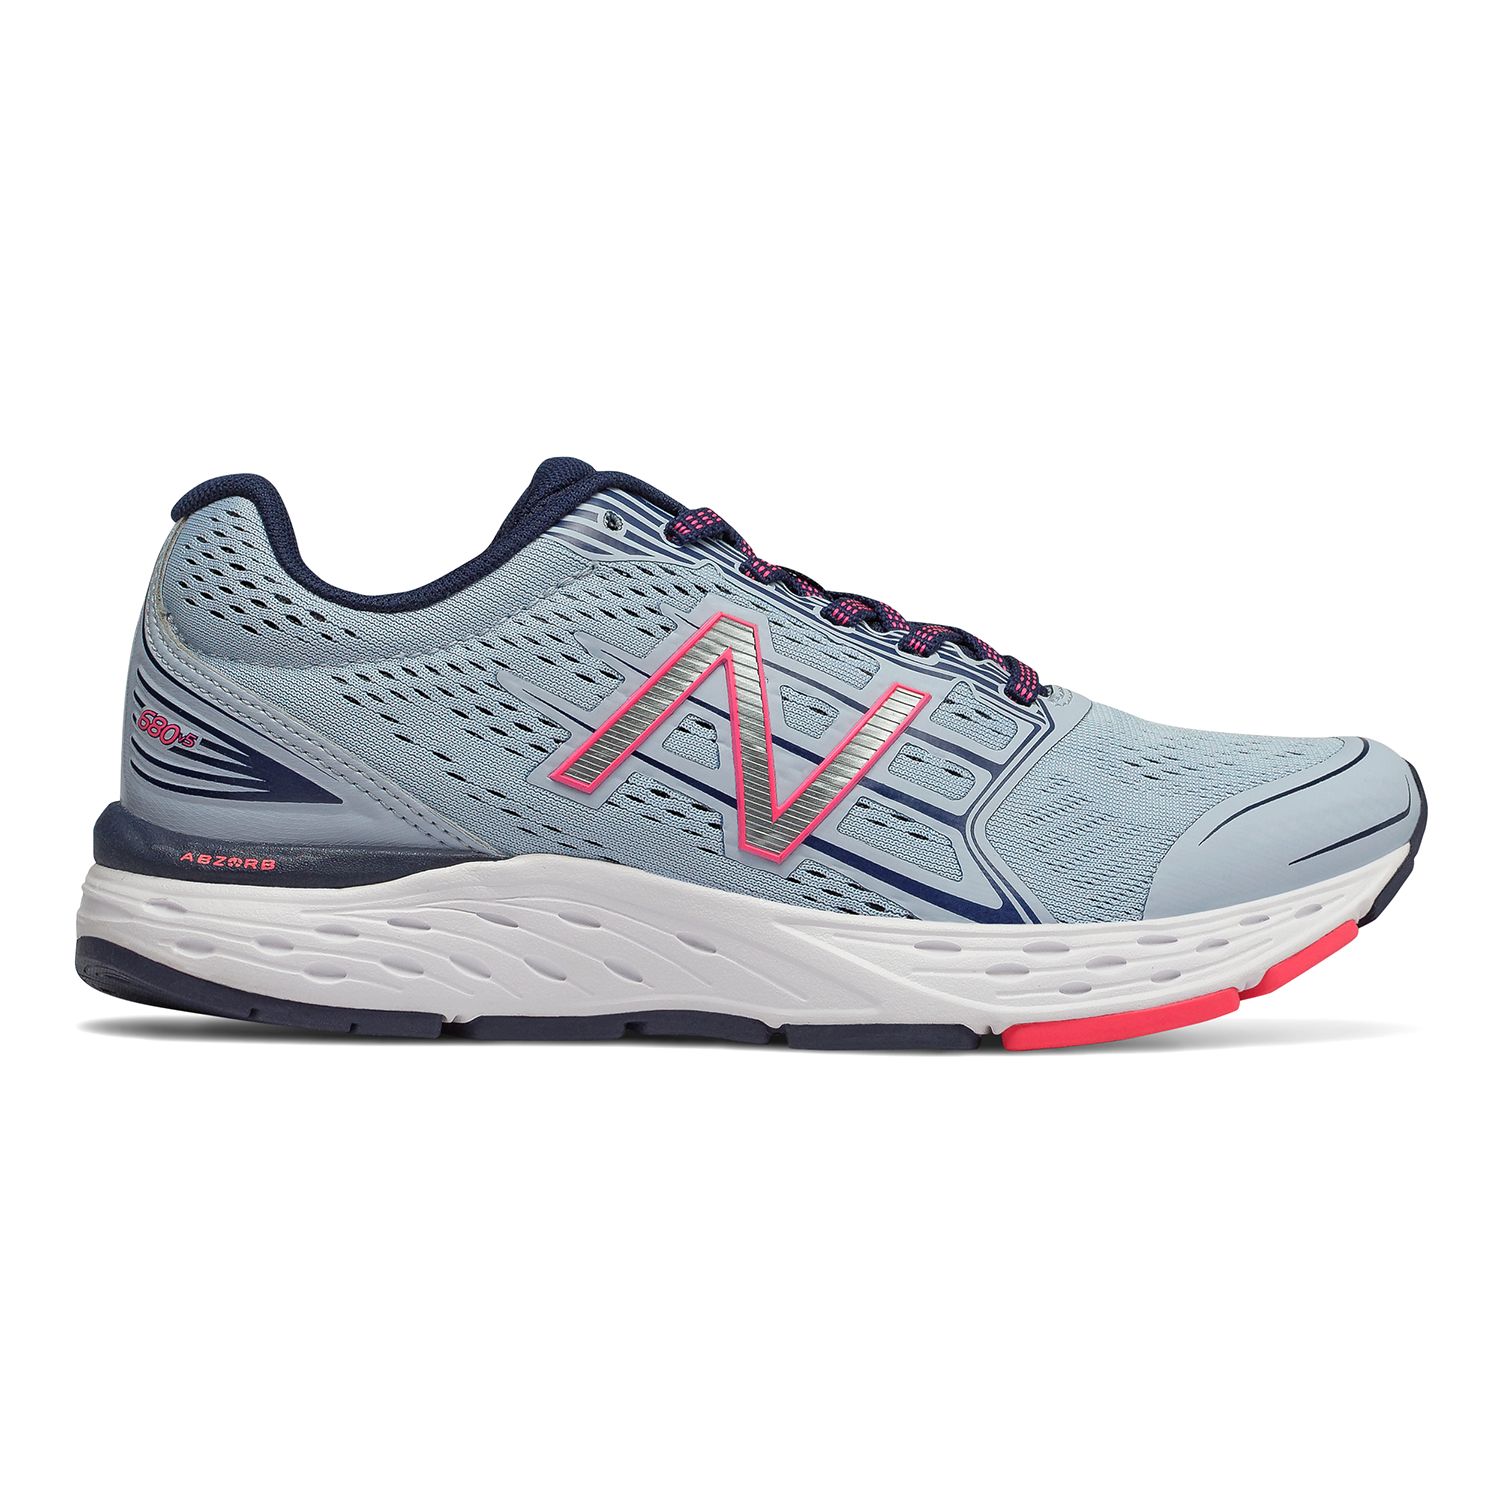 new balance 680 v5 ladies running shoes review